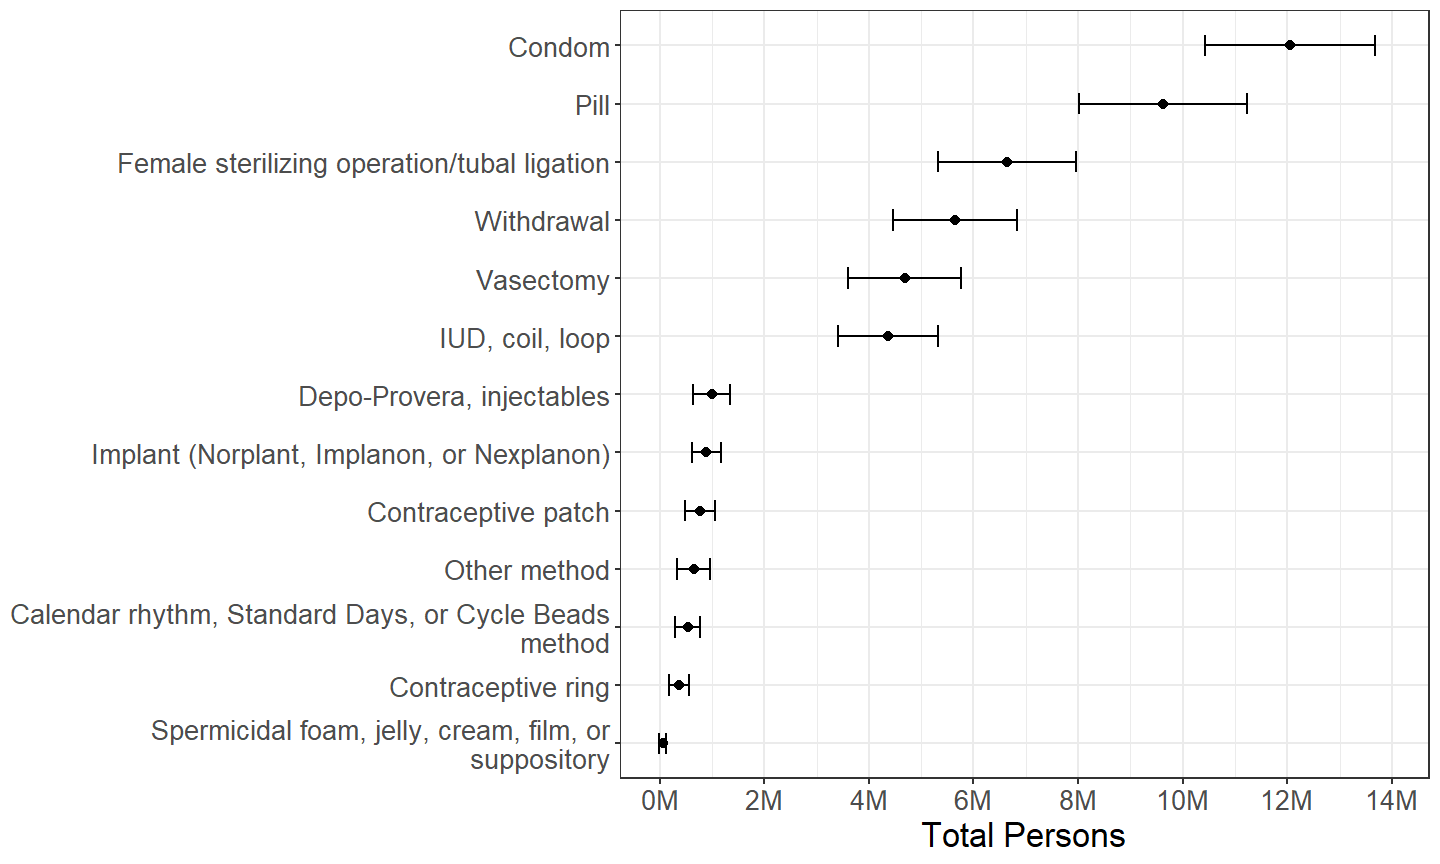 Males categorized by whether or not each contraceptive method was used during last intercourse with a female in the past 3 months, with persons using multiple methods counted multiple times.